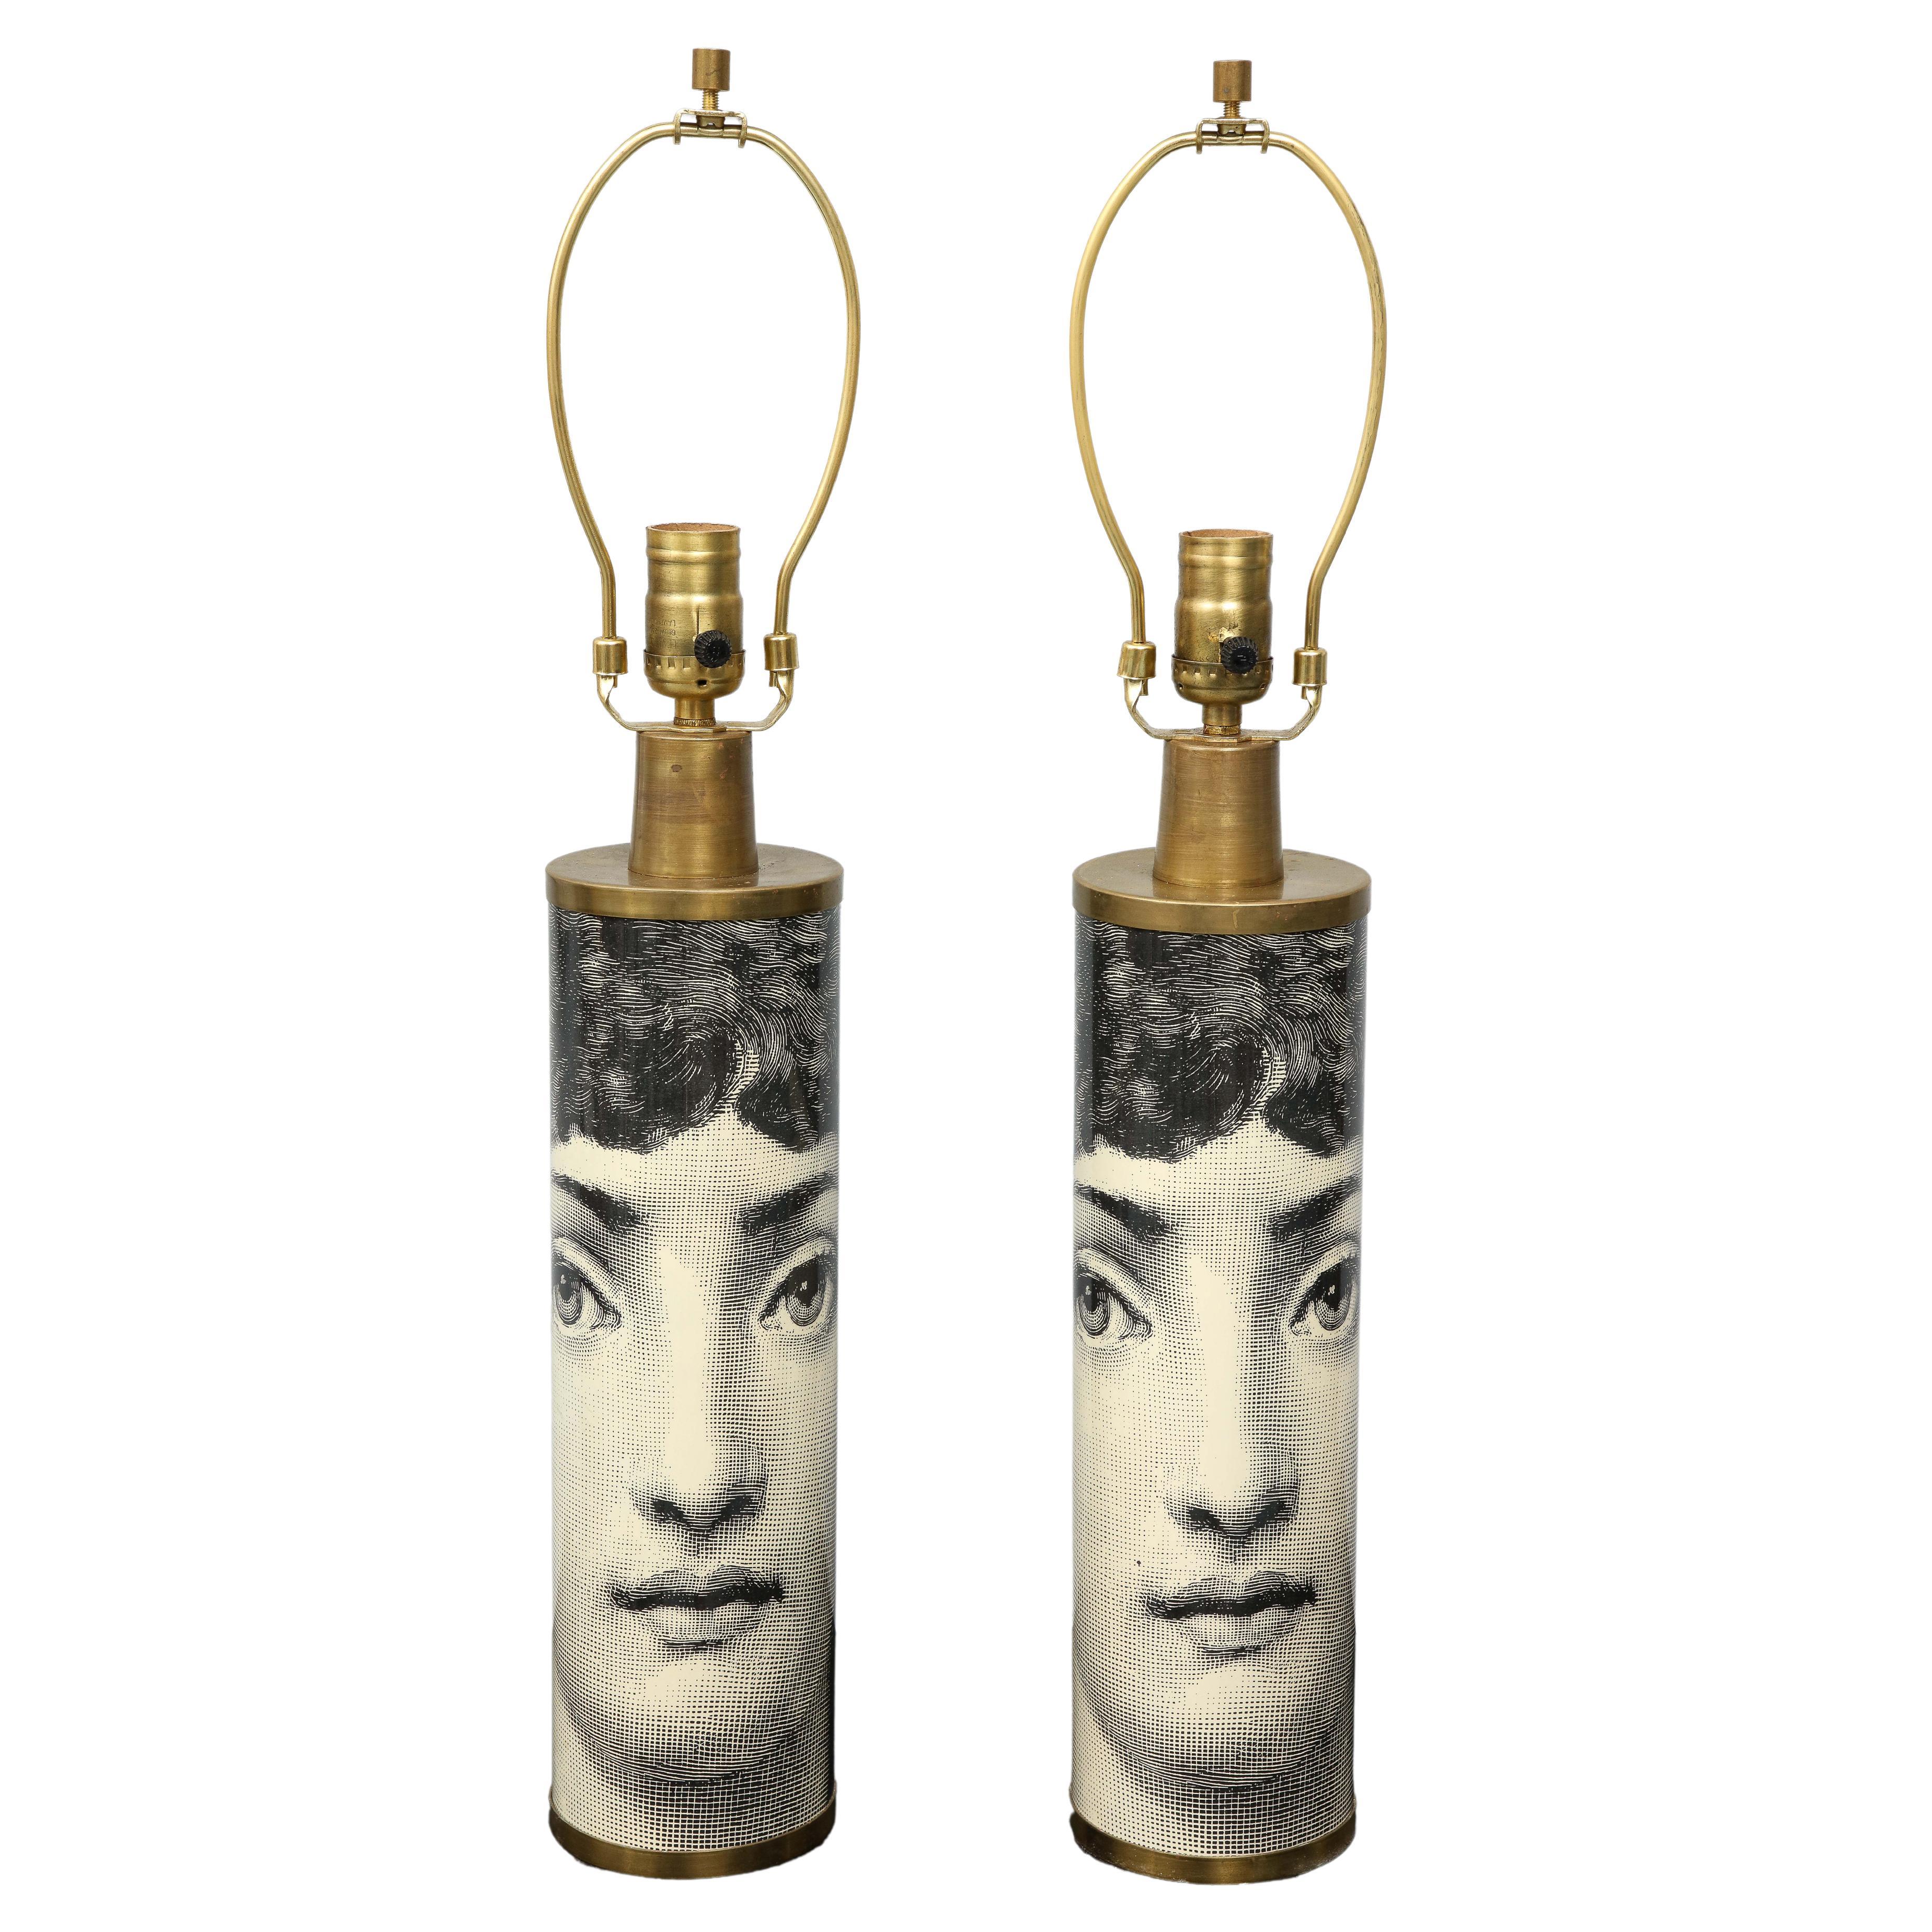 In 1950's Piero Fornasetti used the face of Lina Cavalieri who was an Italian opera soprano for different series of his work. Her portrait then became iconic and even Henry Miller chose one of a variation of Lina Cavalieri's face as the cover of his